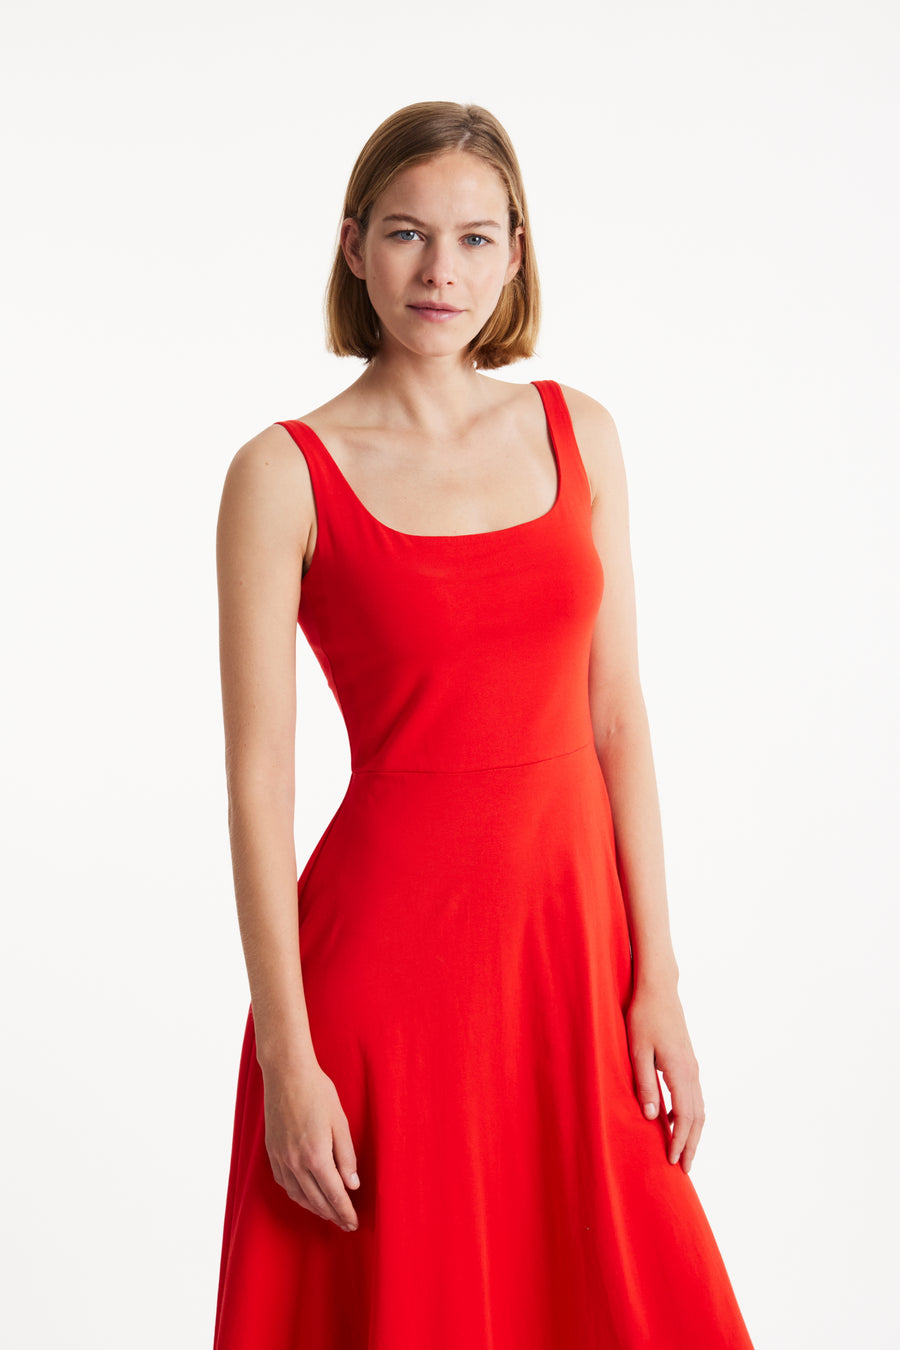 People Tree Fair Trade, Ethical & Sustainable Tyra Dress in Red 95% organic certified cotton, 5% elastane